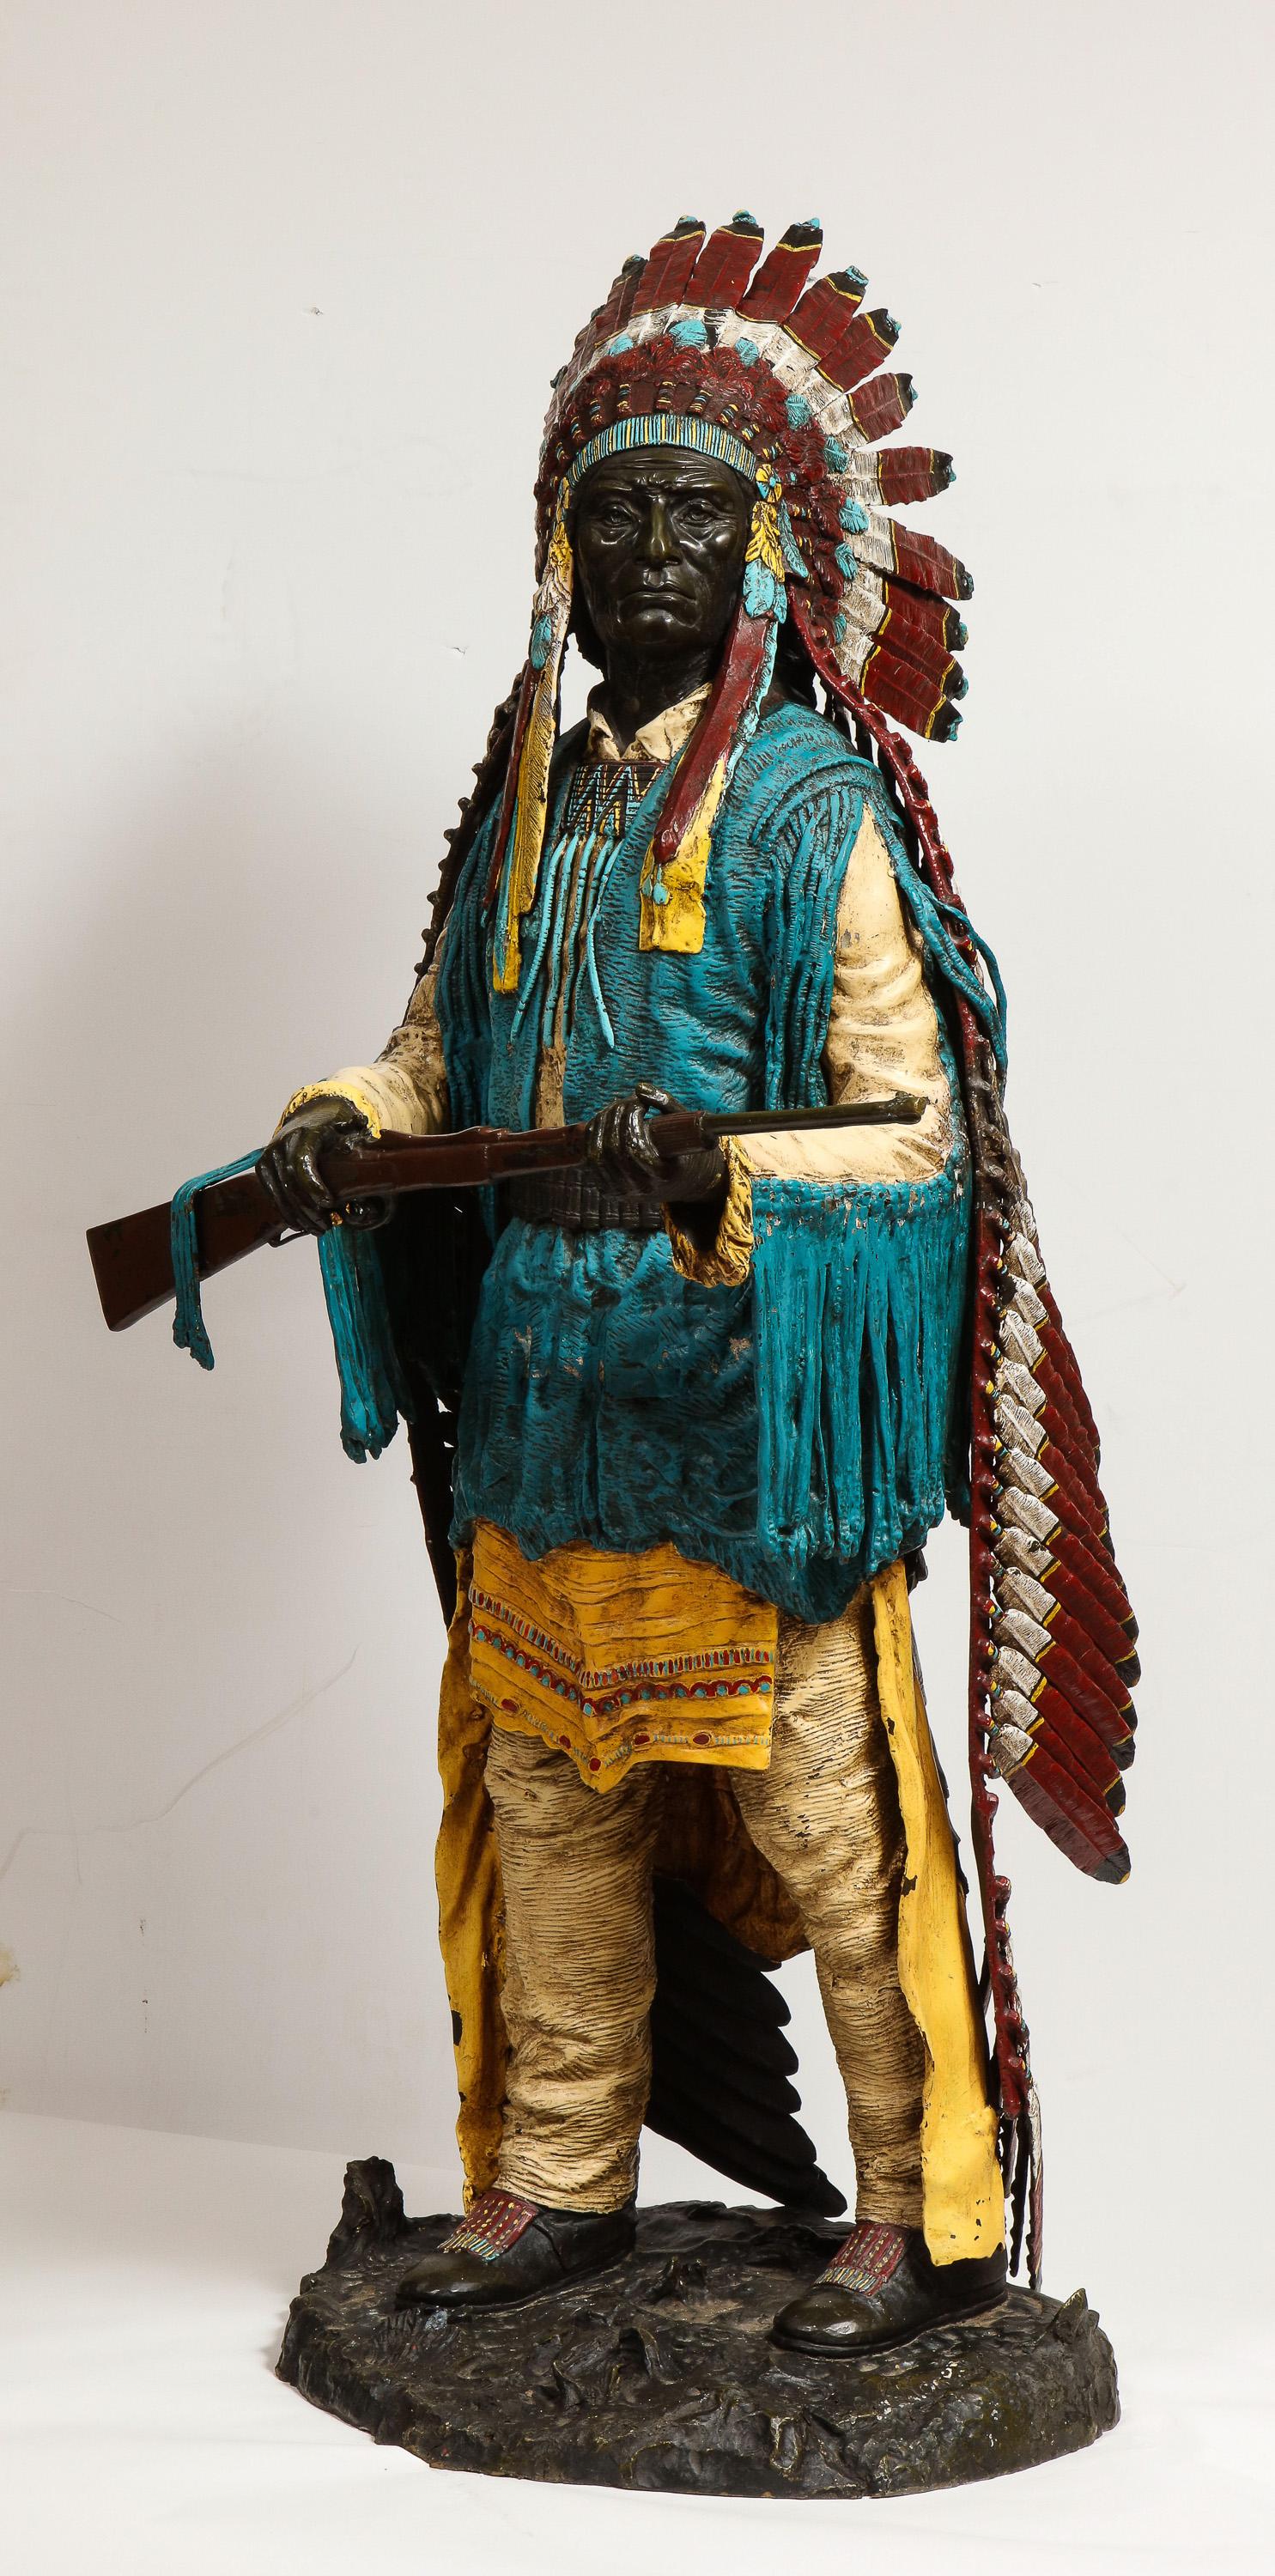 Near Life-Size Polychrome Bronze of a Native American Indian Chief after Kauba 1